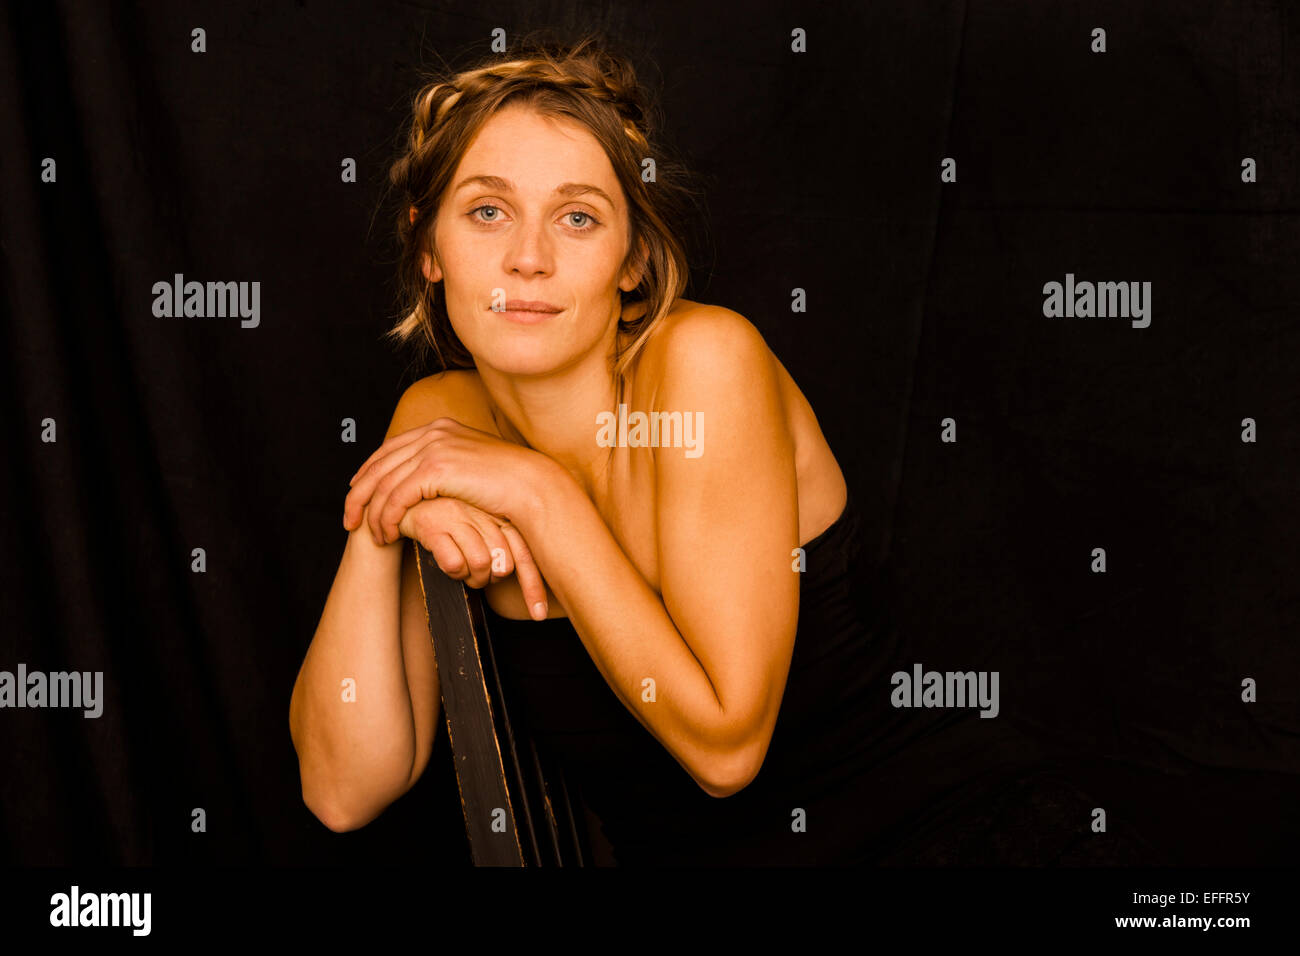 Portrait of woman wearing black corsage leaning on back rest in front of black background Stock Photo